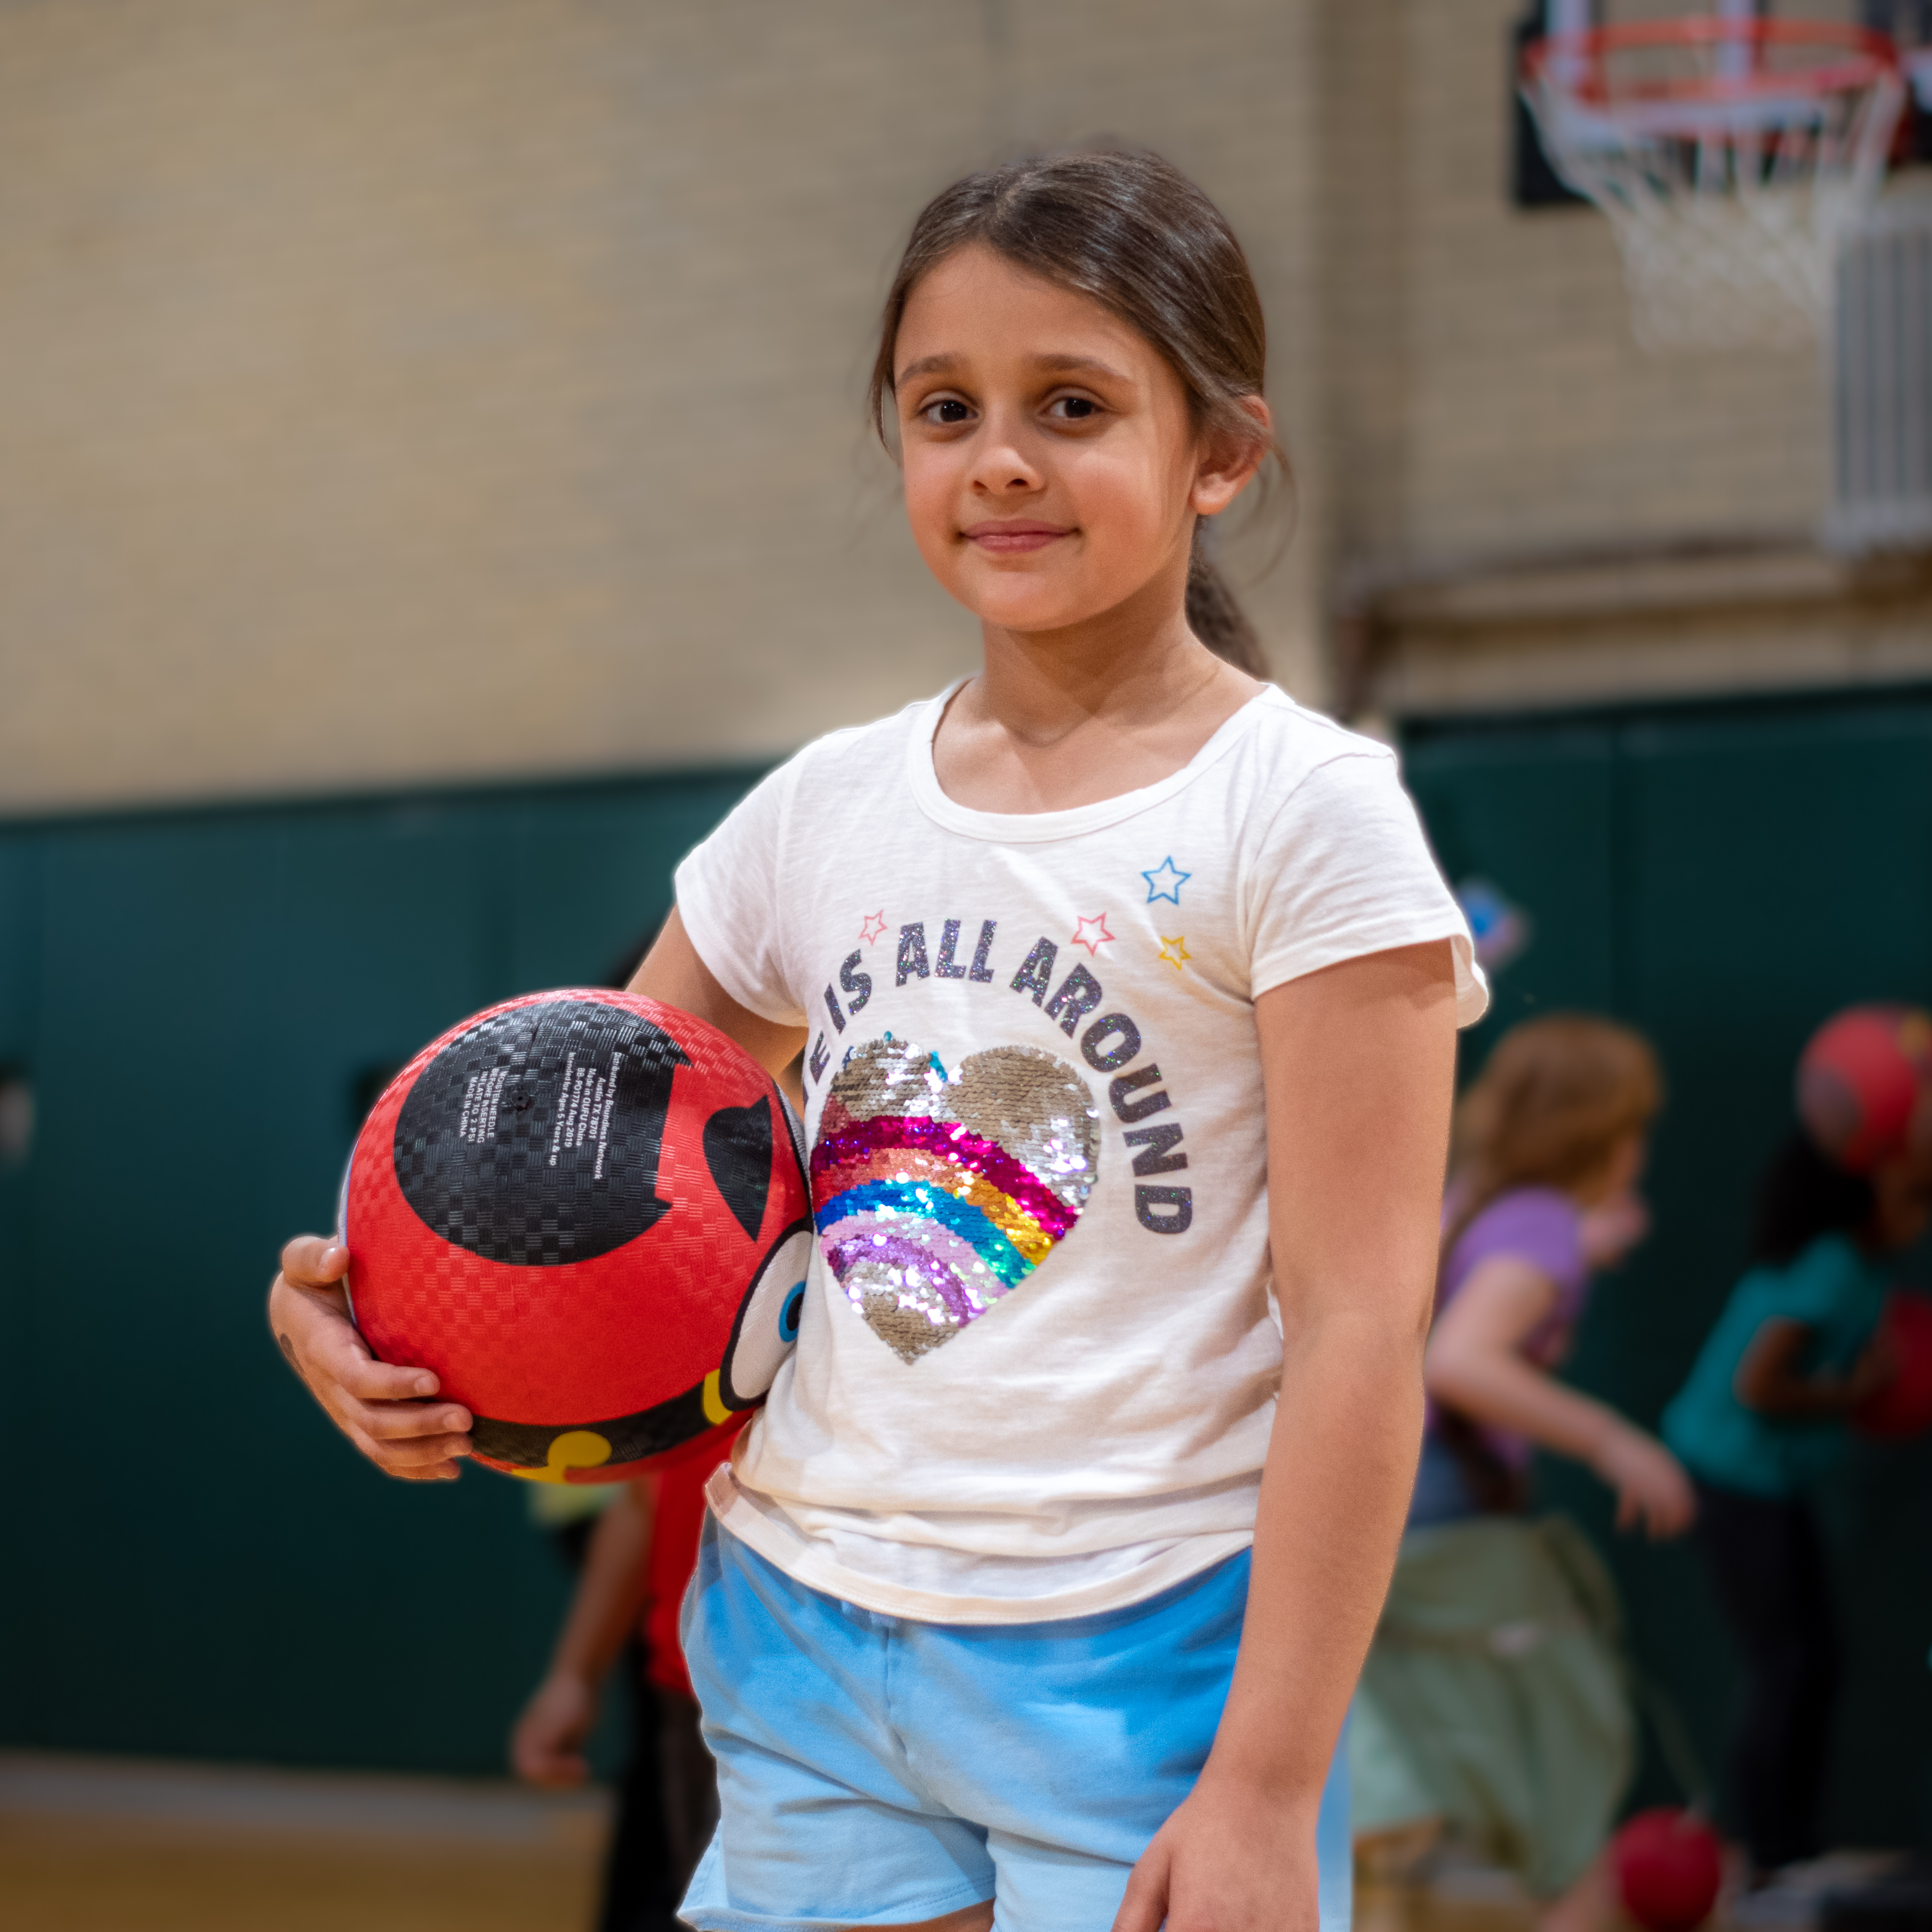 Student in gym class smiling as they hold a sports ball as other students in the background play. 